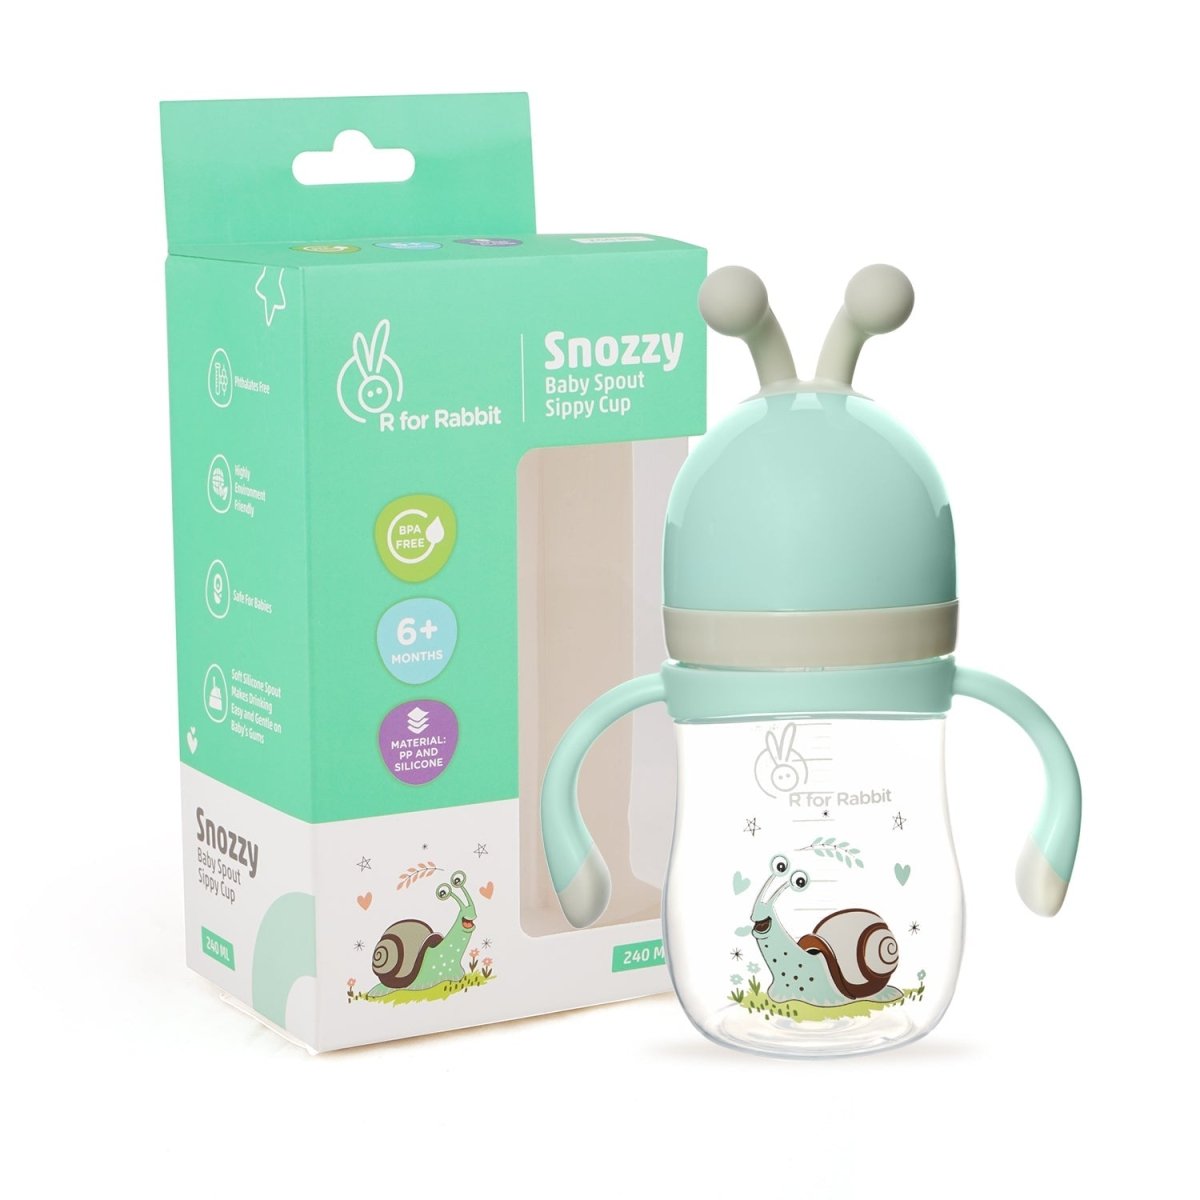 R for Rabbit Snoozy Baby Spout Sippy Cup 240ml- Green - SSSZG01